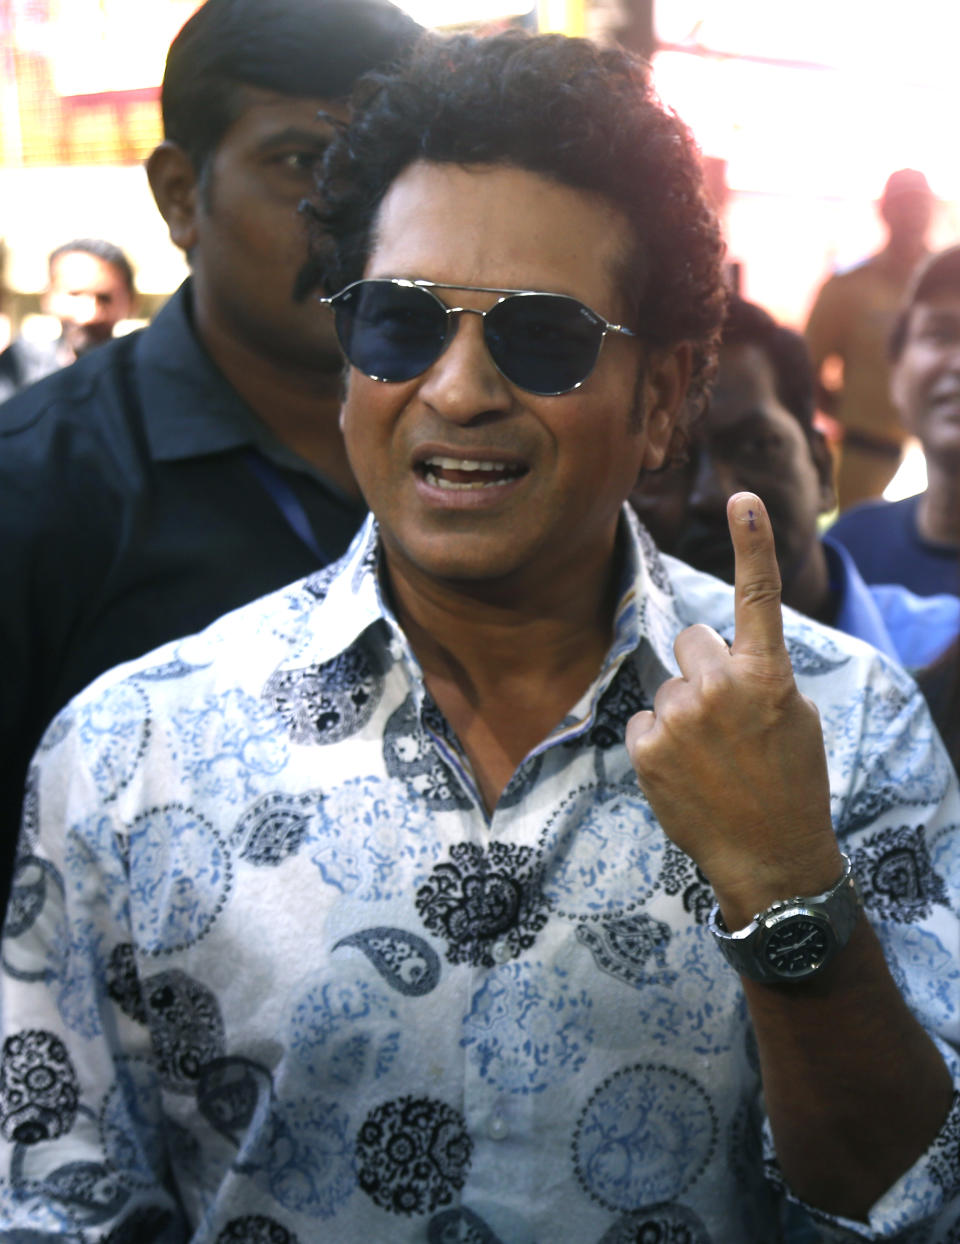 Former Indian cricketer Sachin Tendulkar poses for media after casting his votes in Mumbai, India, Monday, Oct. 21, 2019. Voting is underway in two Indian states of Maharashtra in the west and Haryana in the north where the Hindu nationalist Bharatiya Janata Party (BJP) headed by prime minister Narendra Modi is trying to win a second consecutive term. (AP Photo/Rafiq Maqbool)